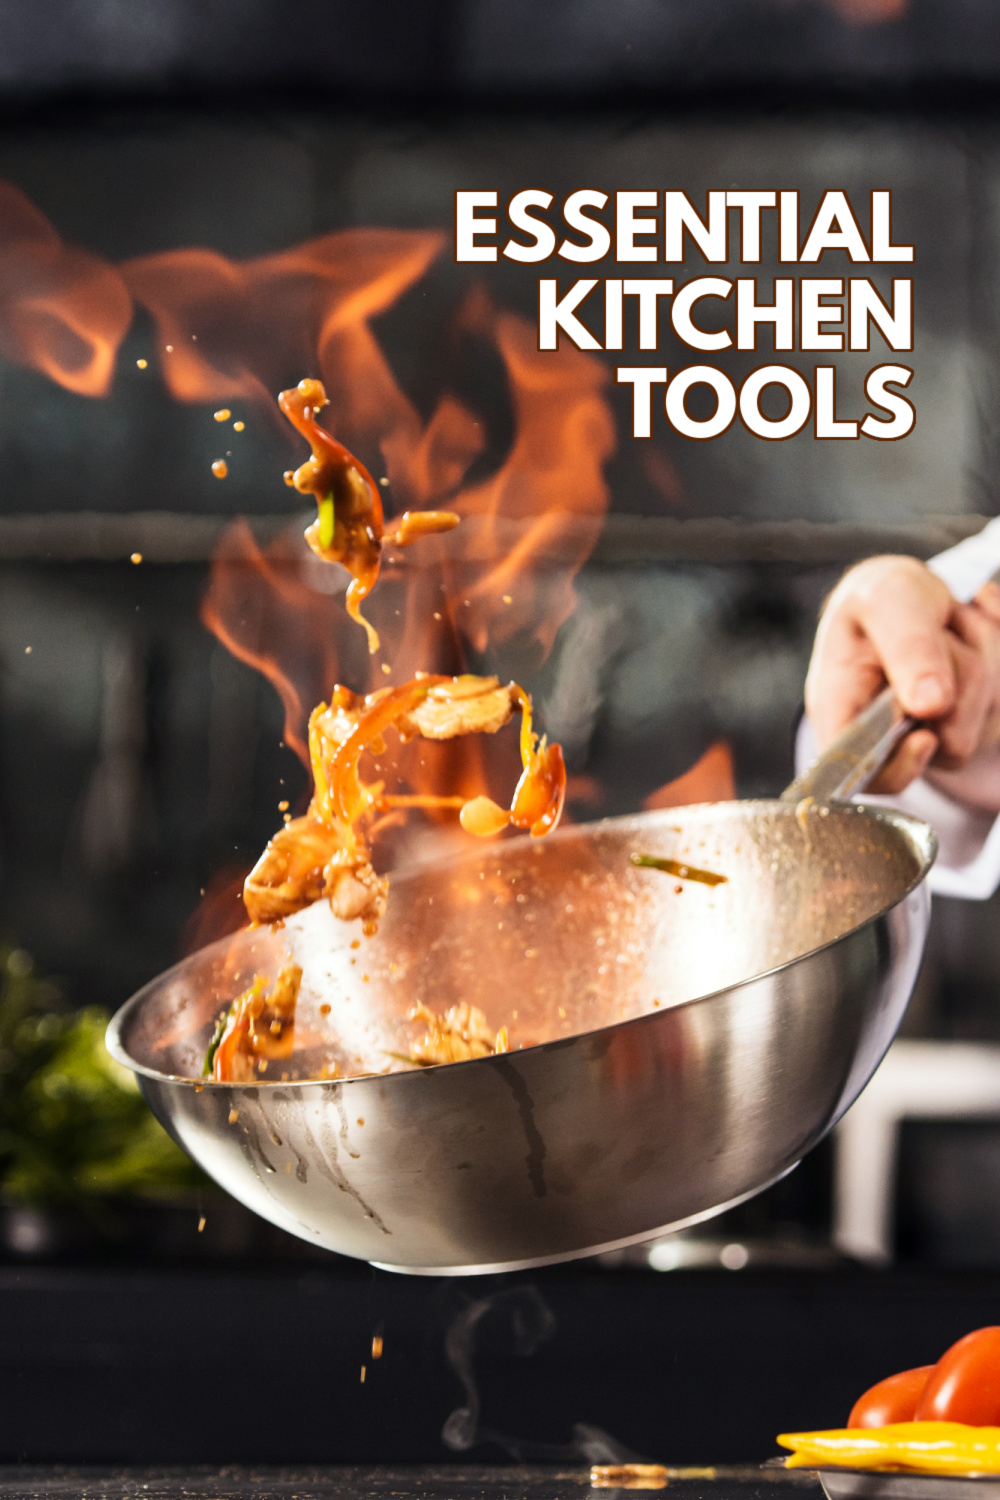 Ten Essential Cooking Tools for Chef Students